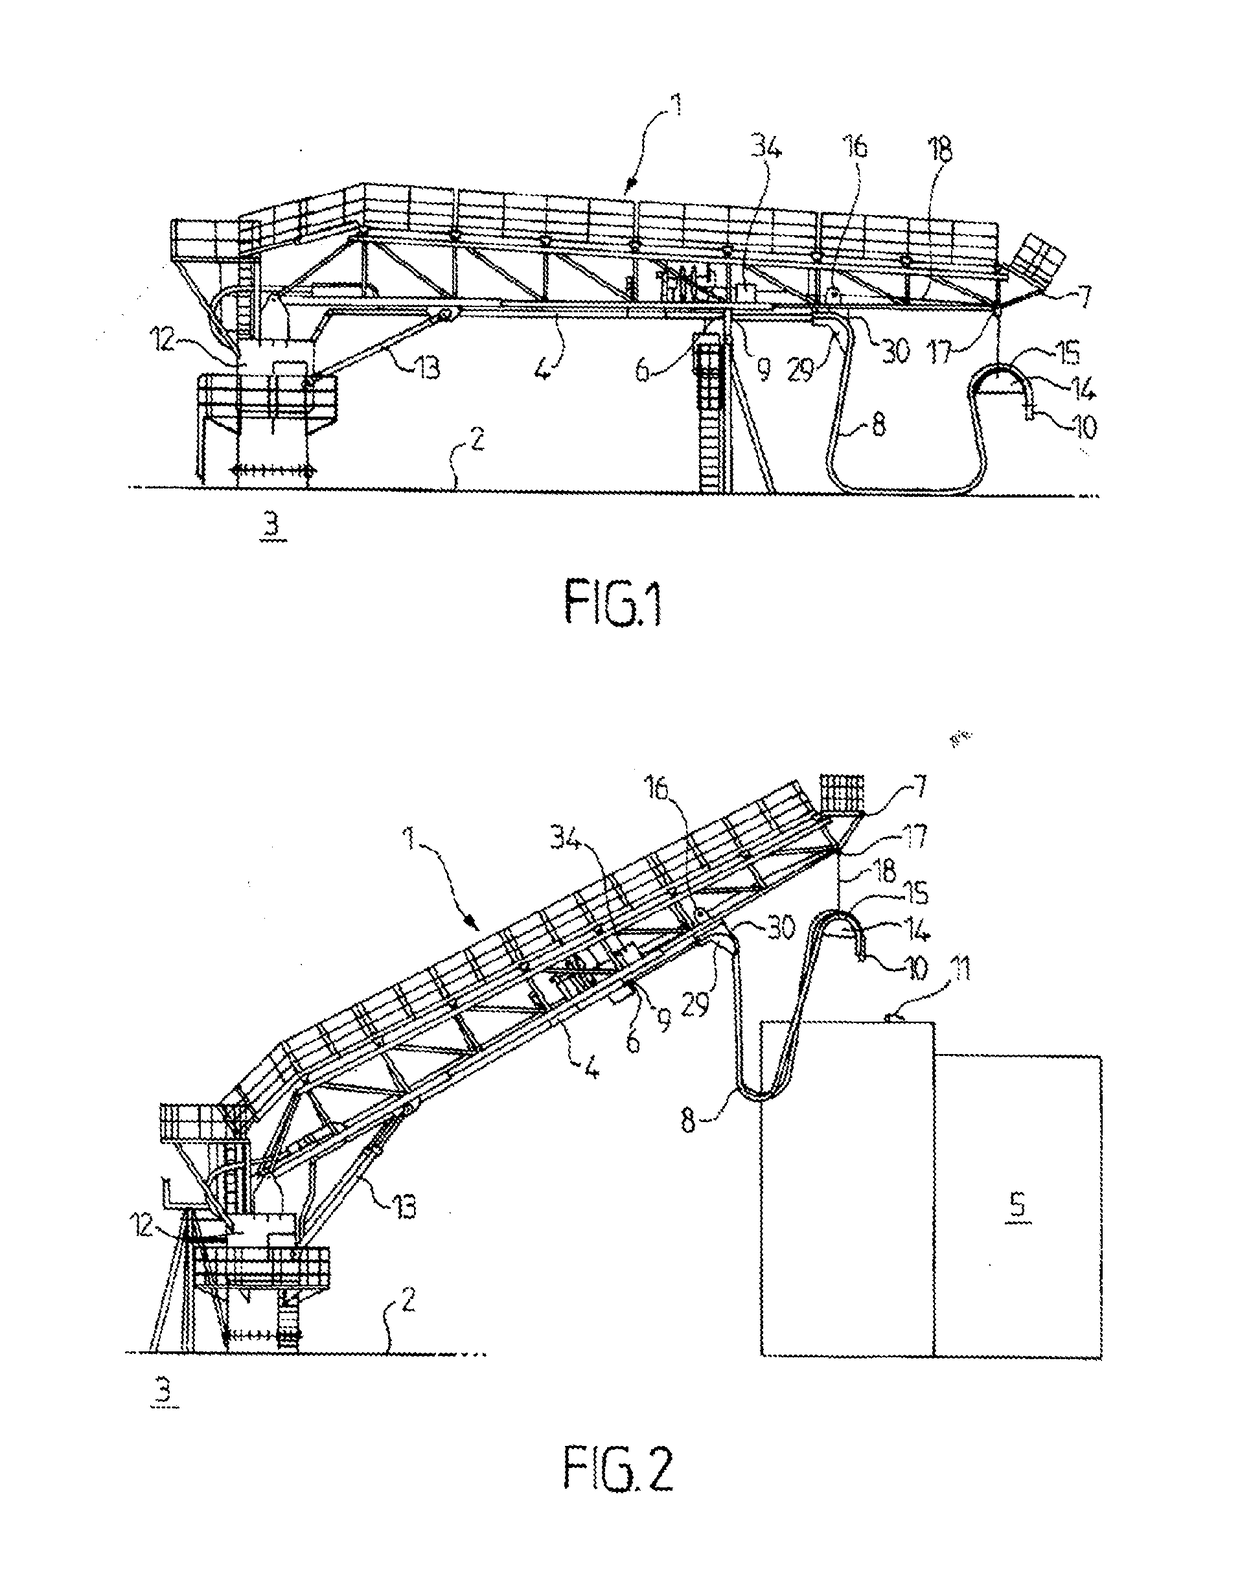 System for transferring fluid between a ship and a facility, such as a client ship